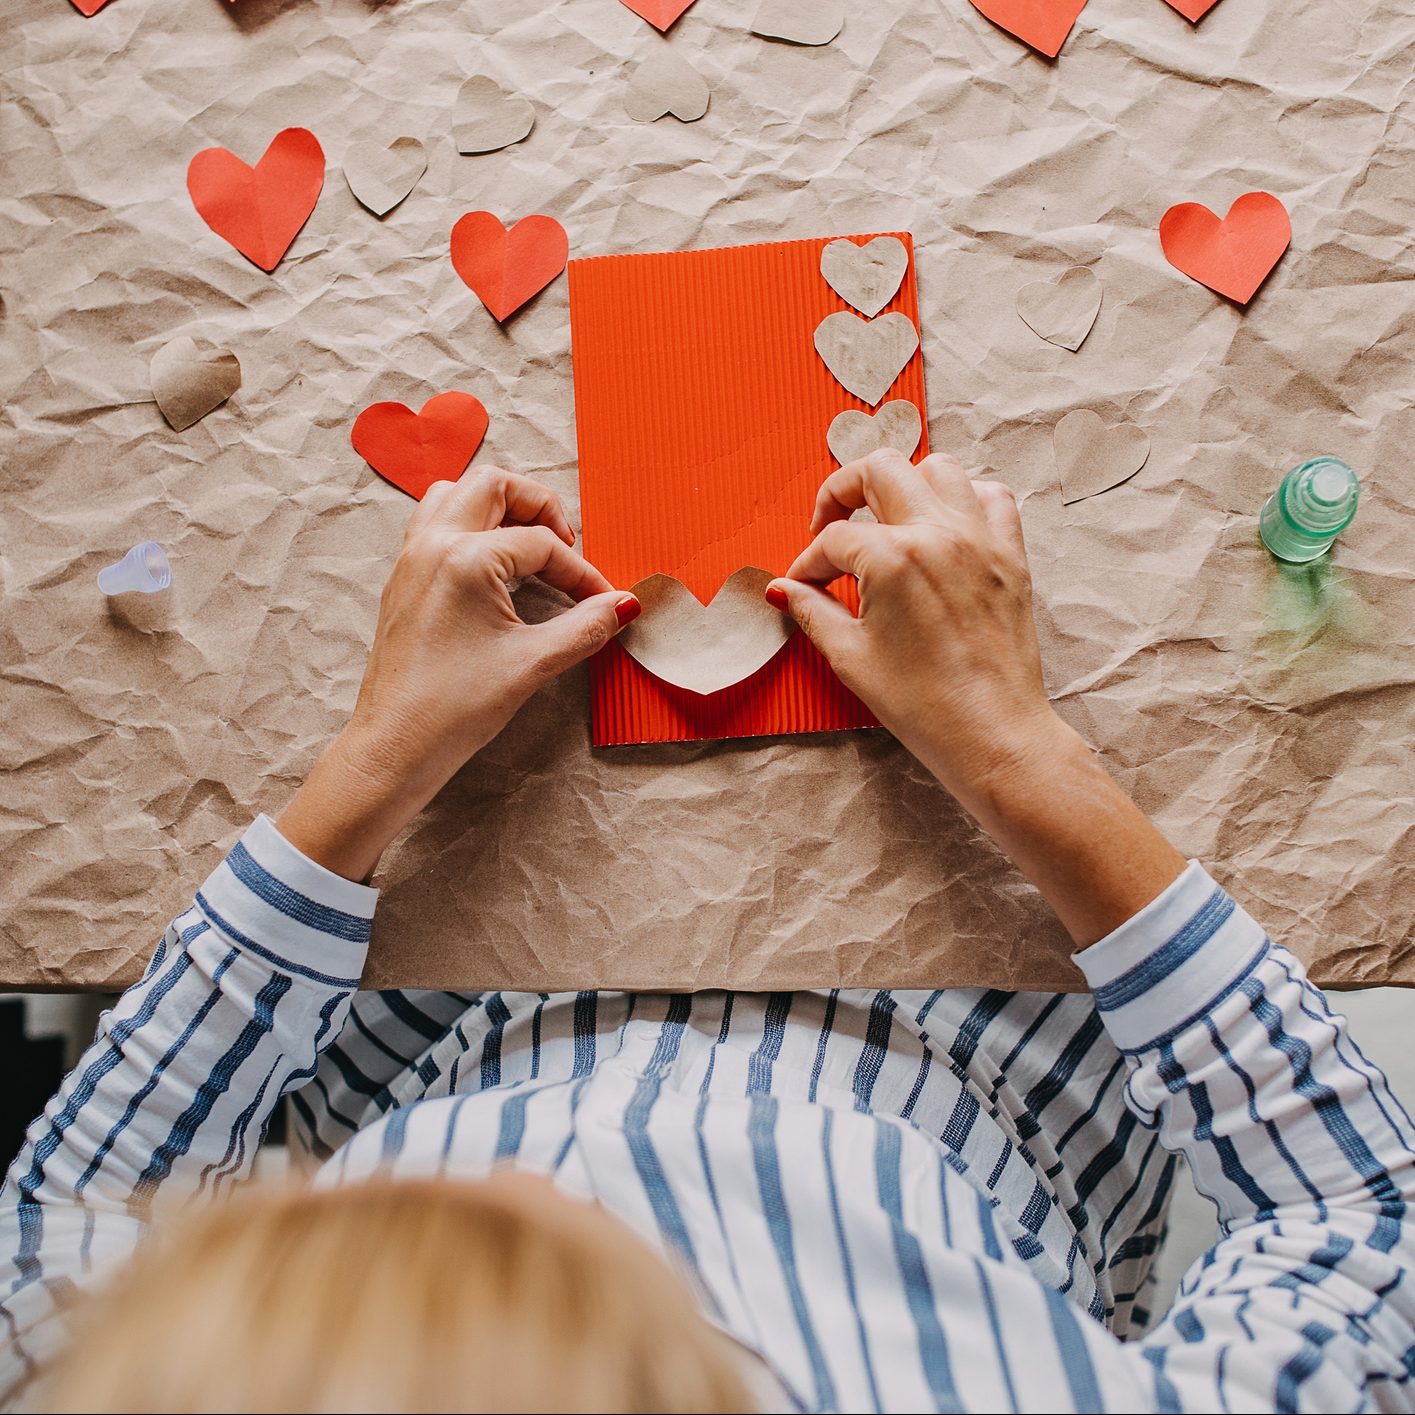 Store All Your Cute Cards in One of These DIY Valentine's Day Boxes